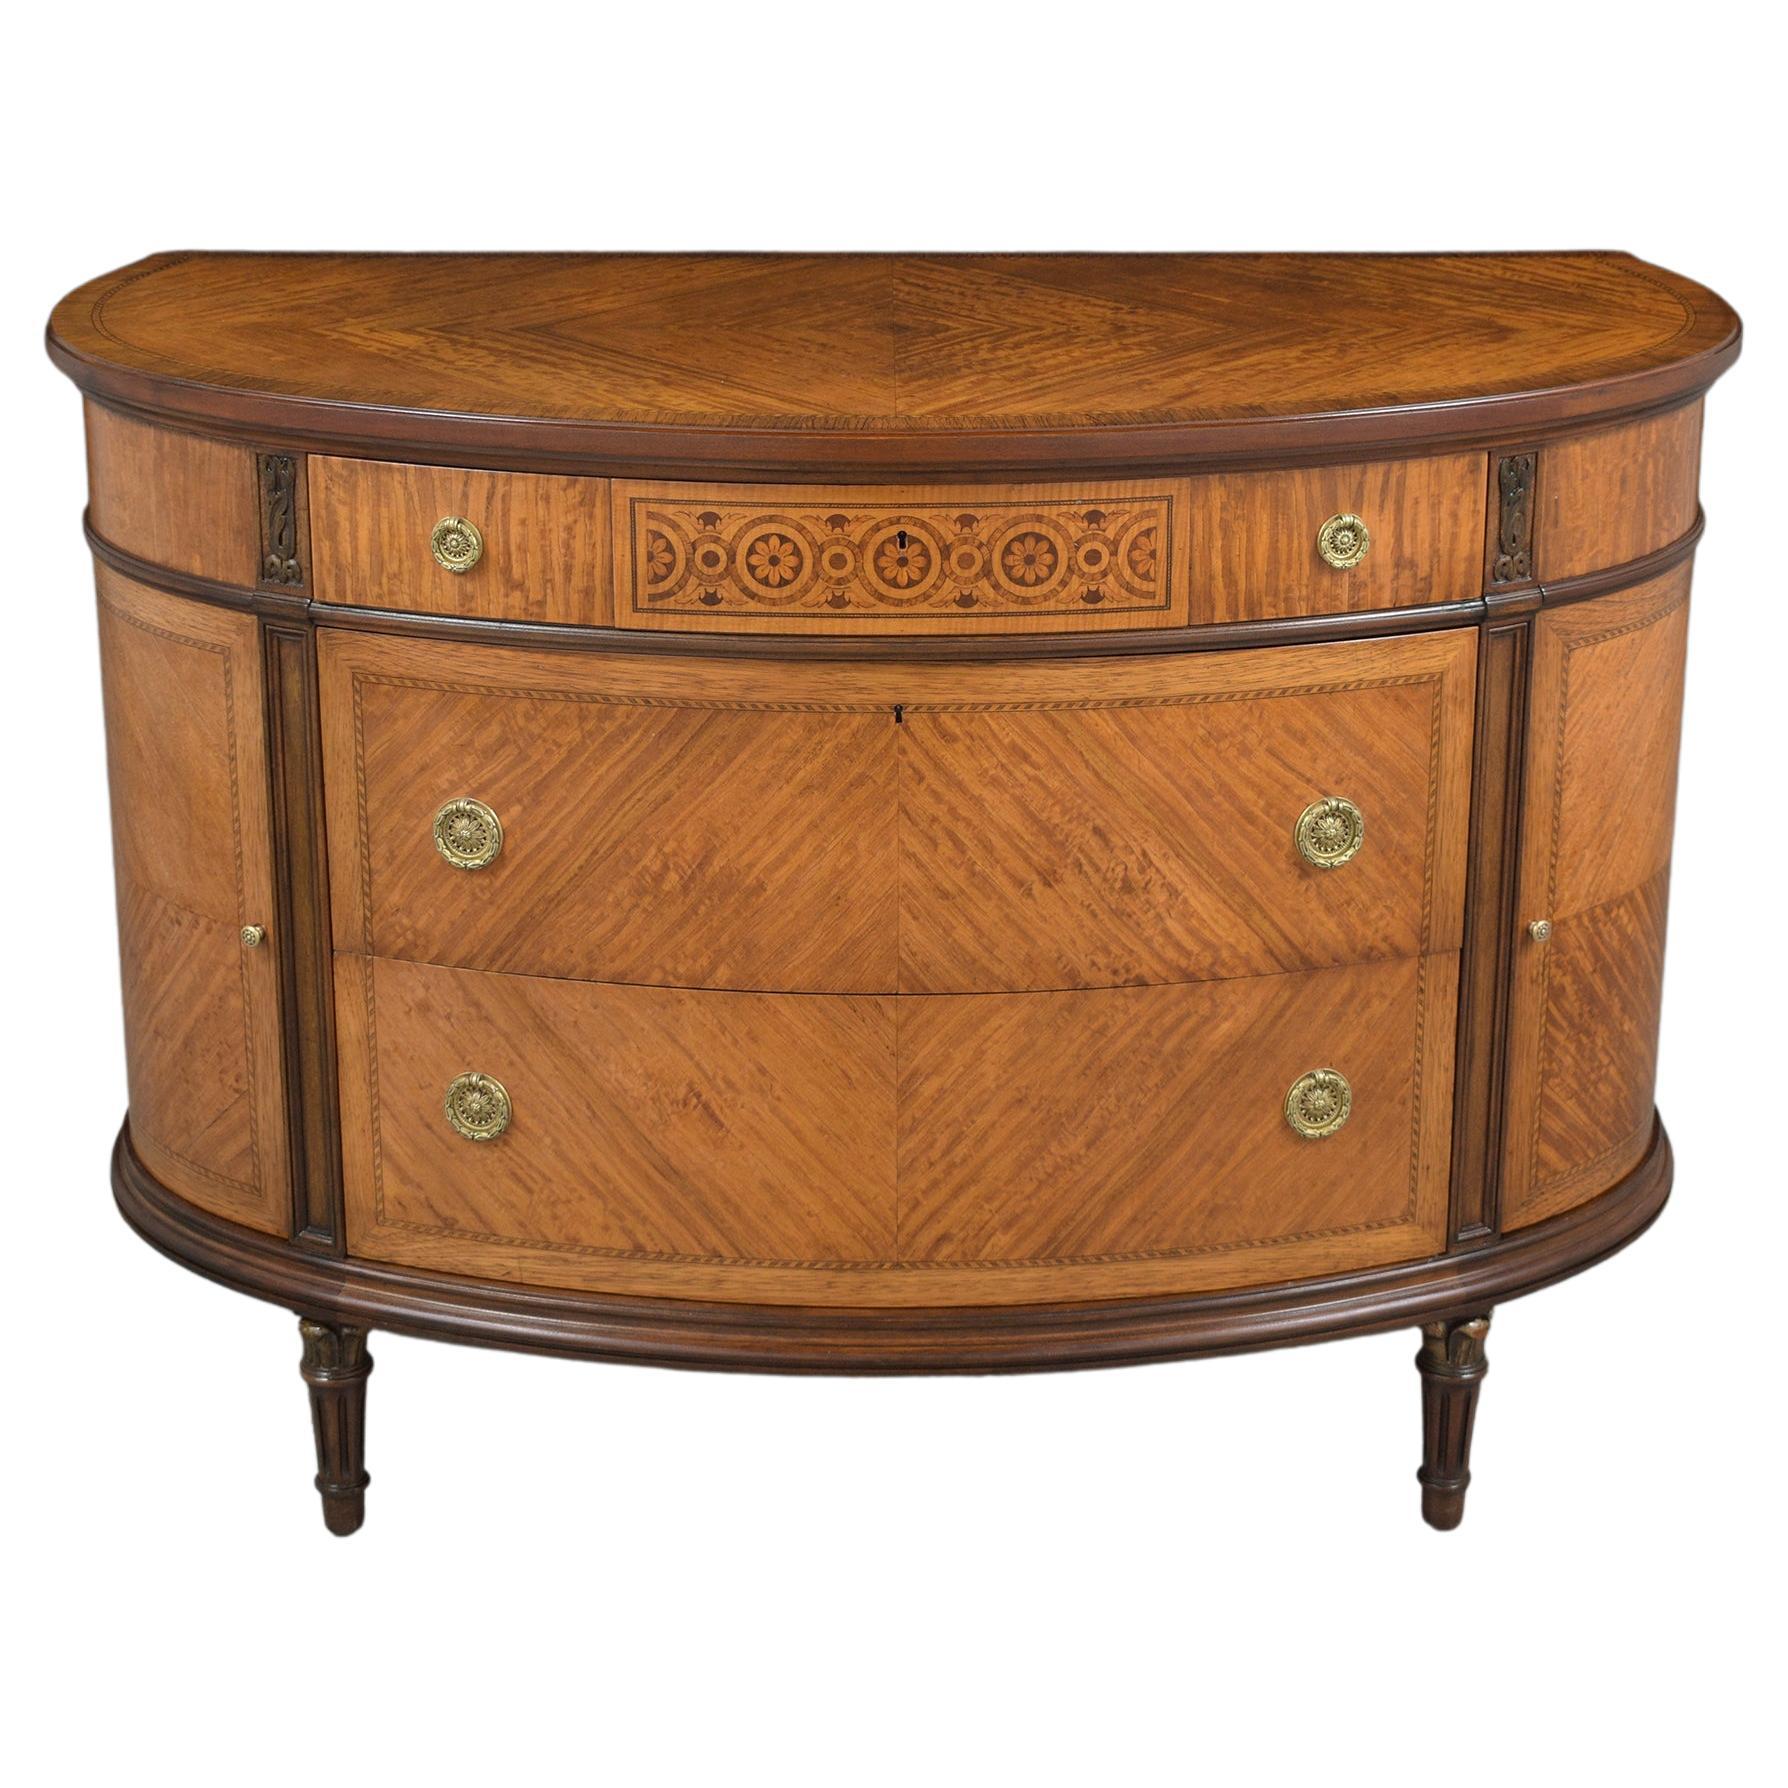 1940s Restored French Louis XVI Demilune Commode with Fruitwood Inlays & Molding